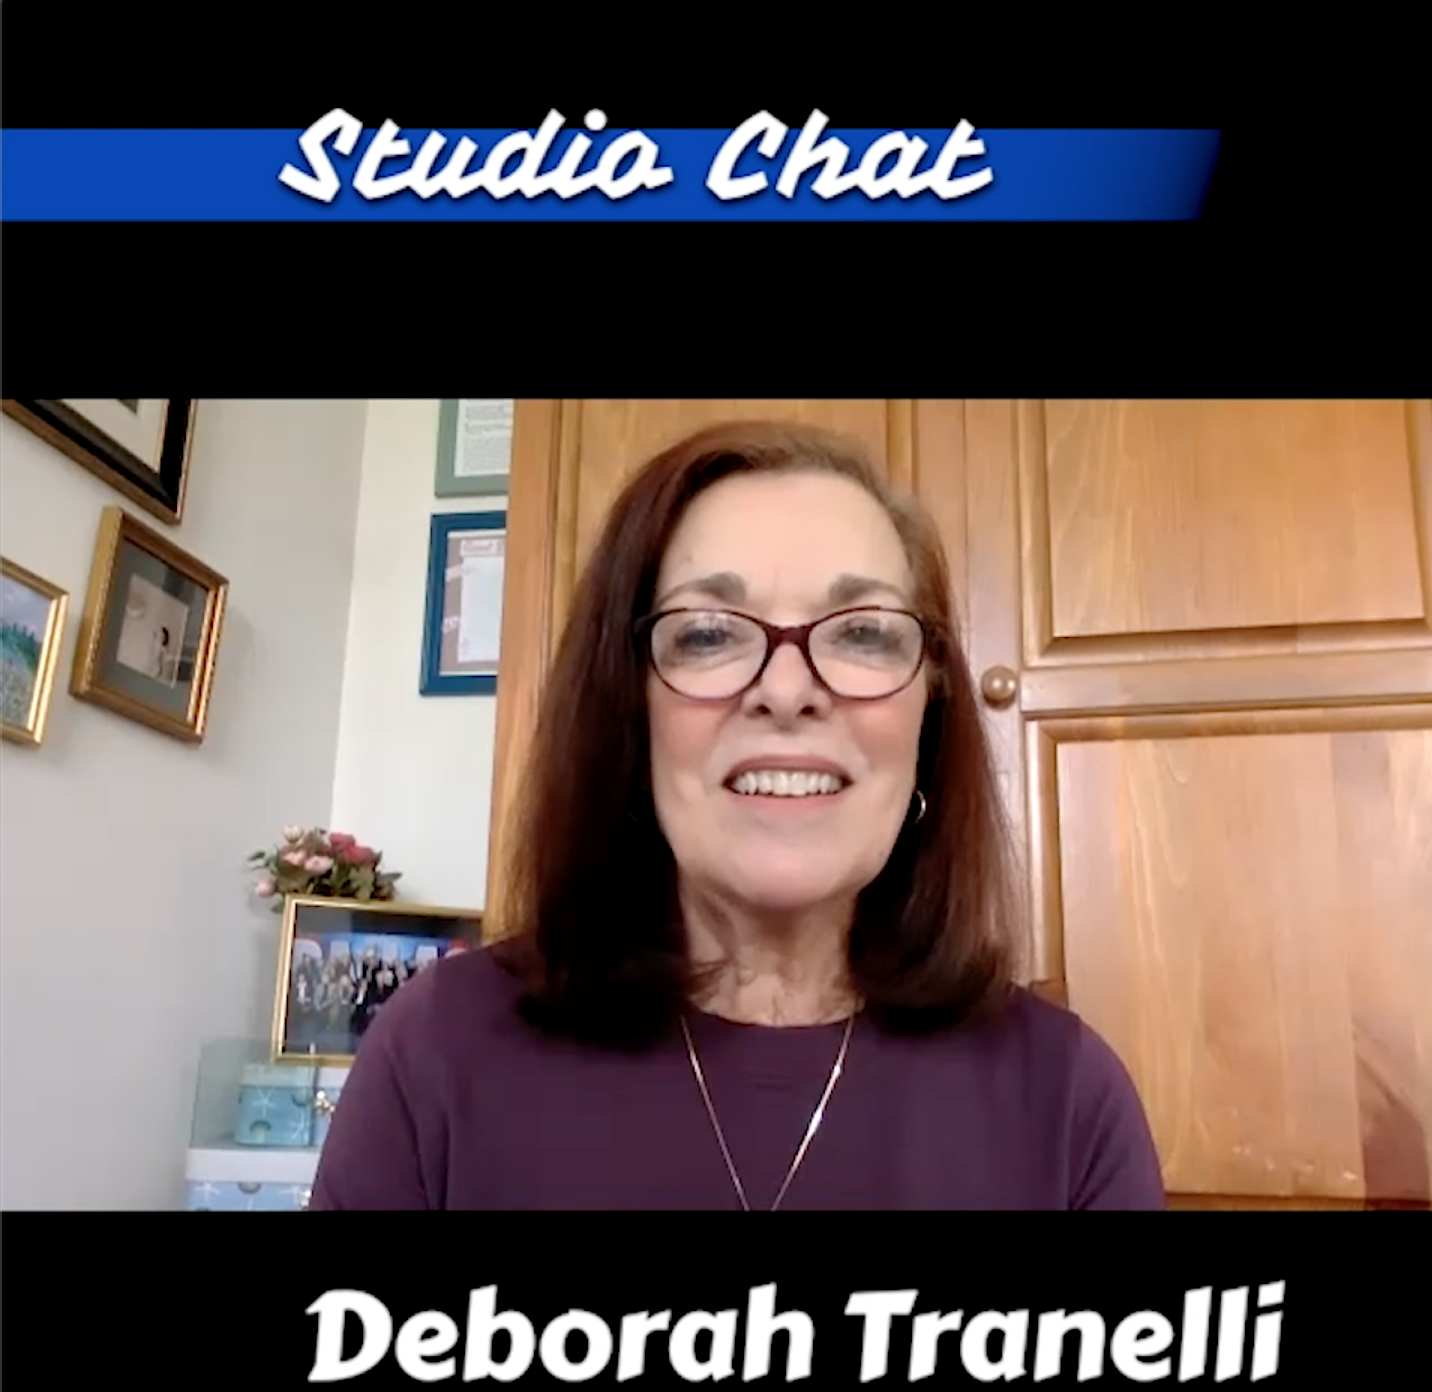 Deborah Tranelli Interview: “Dallas” Through the Eyes of Phyllis, and A World of Performing Arts